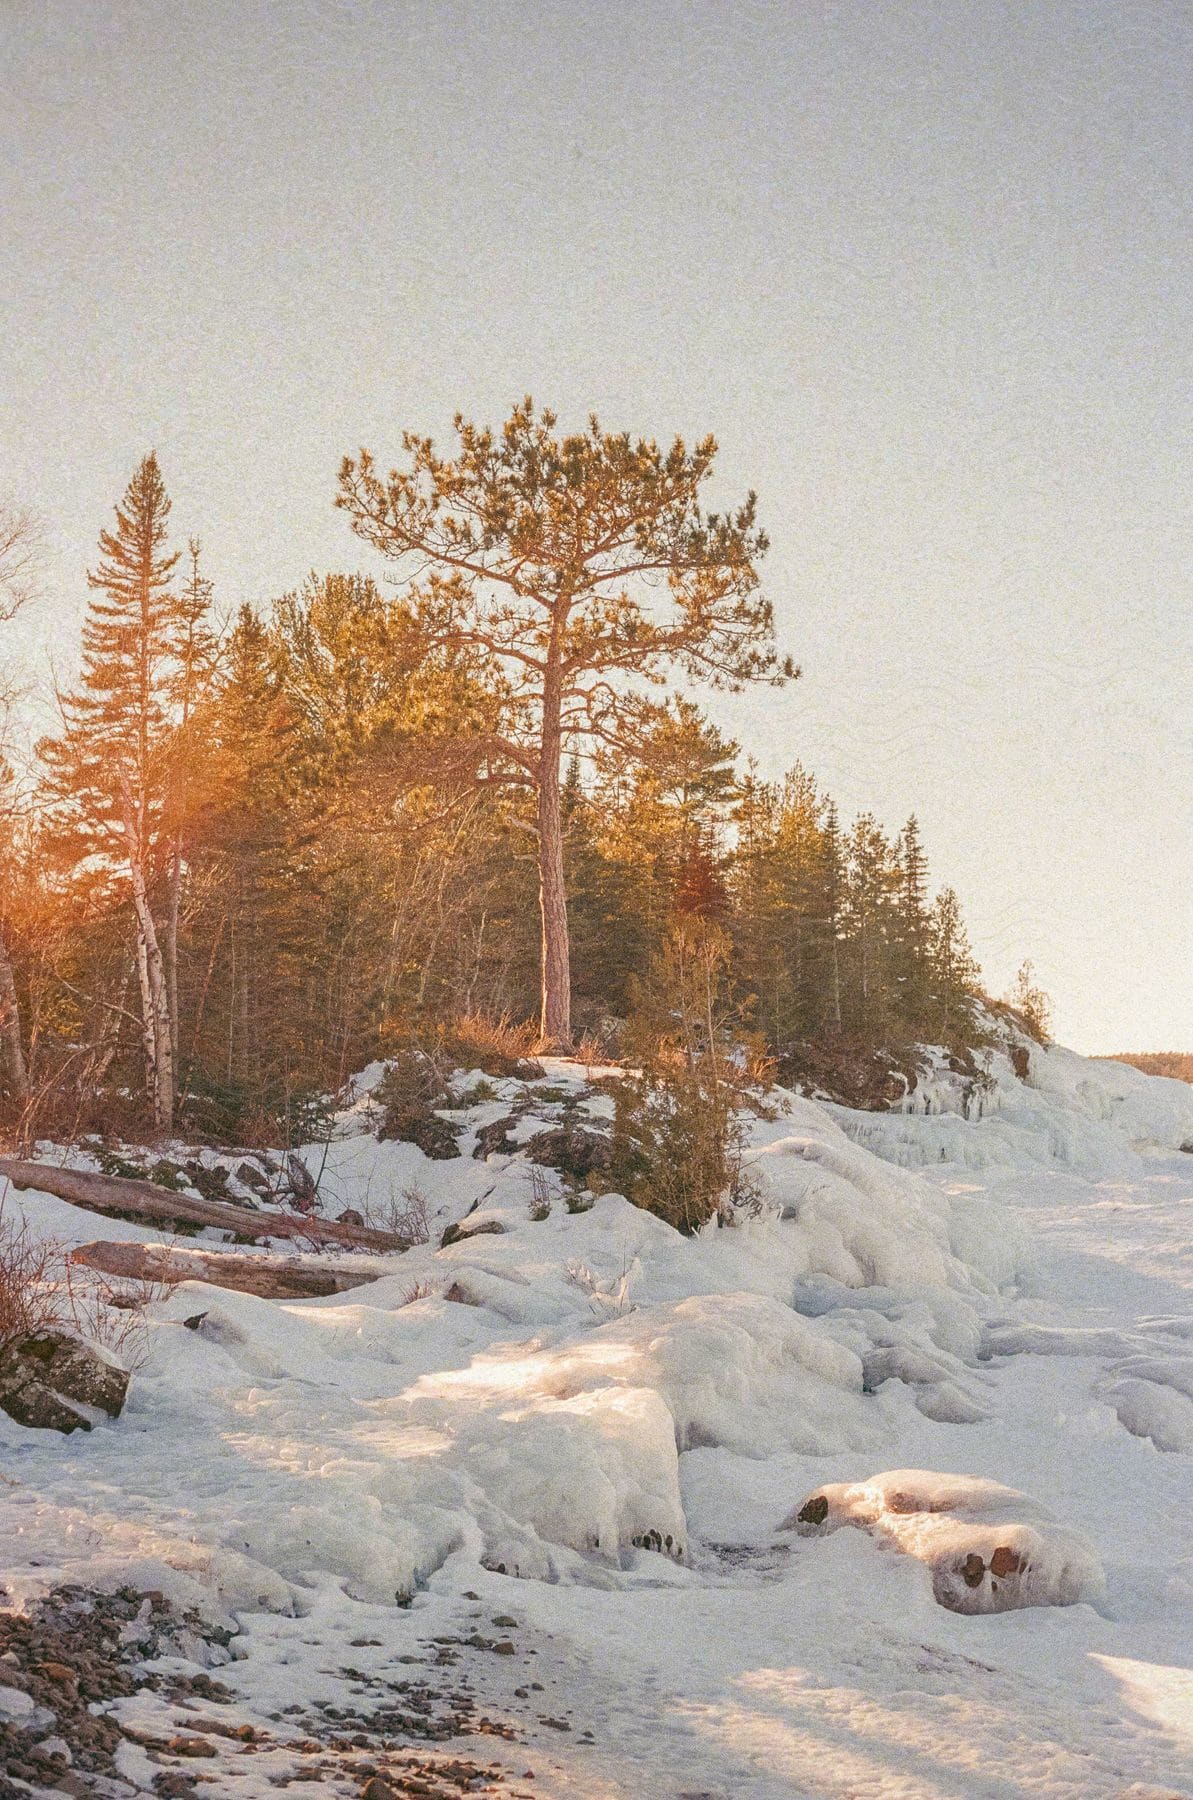 A forest near a snowy field at sunset